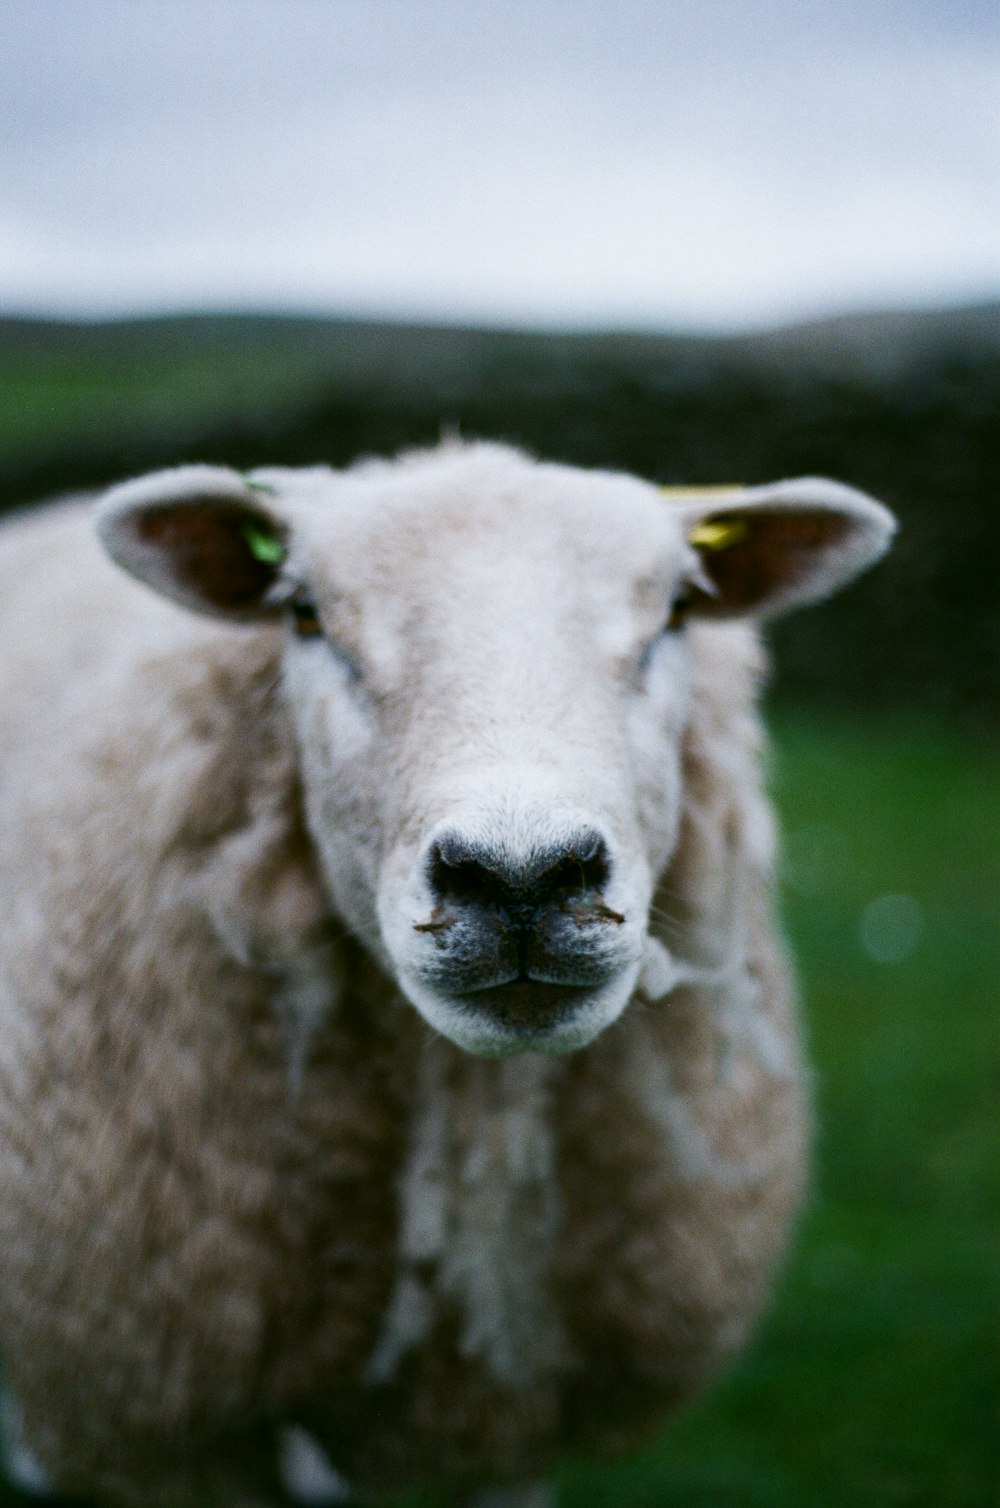 a close up of a sheep in a field